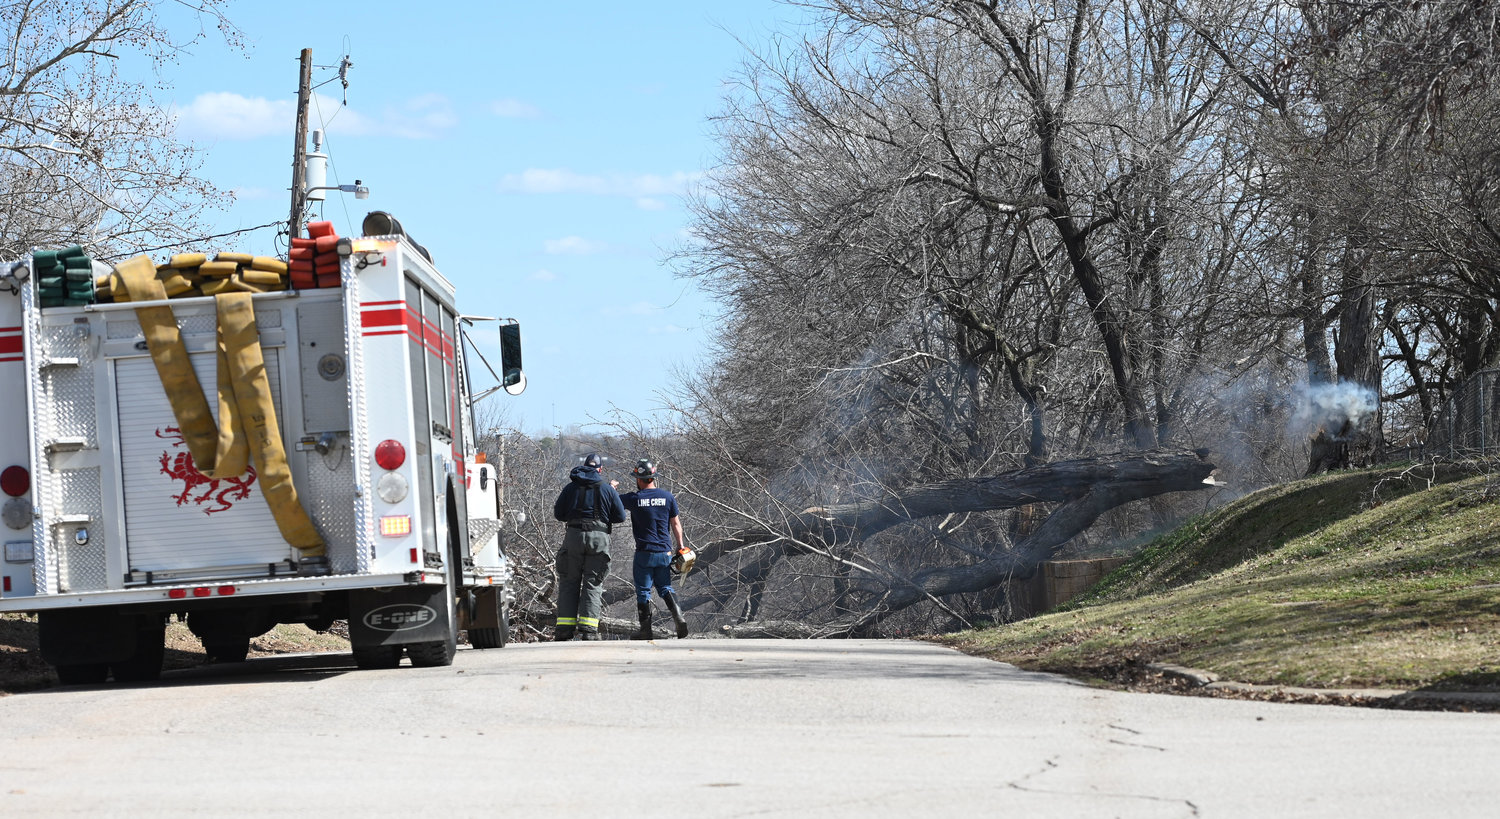 High winds blew a tree onto a power line Tuesday, blocking Monroe Street and sparking a small fire, near 4th Street. Wind gusts were measured in the 50s much of the day.